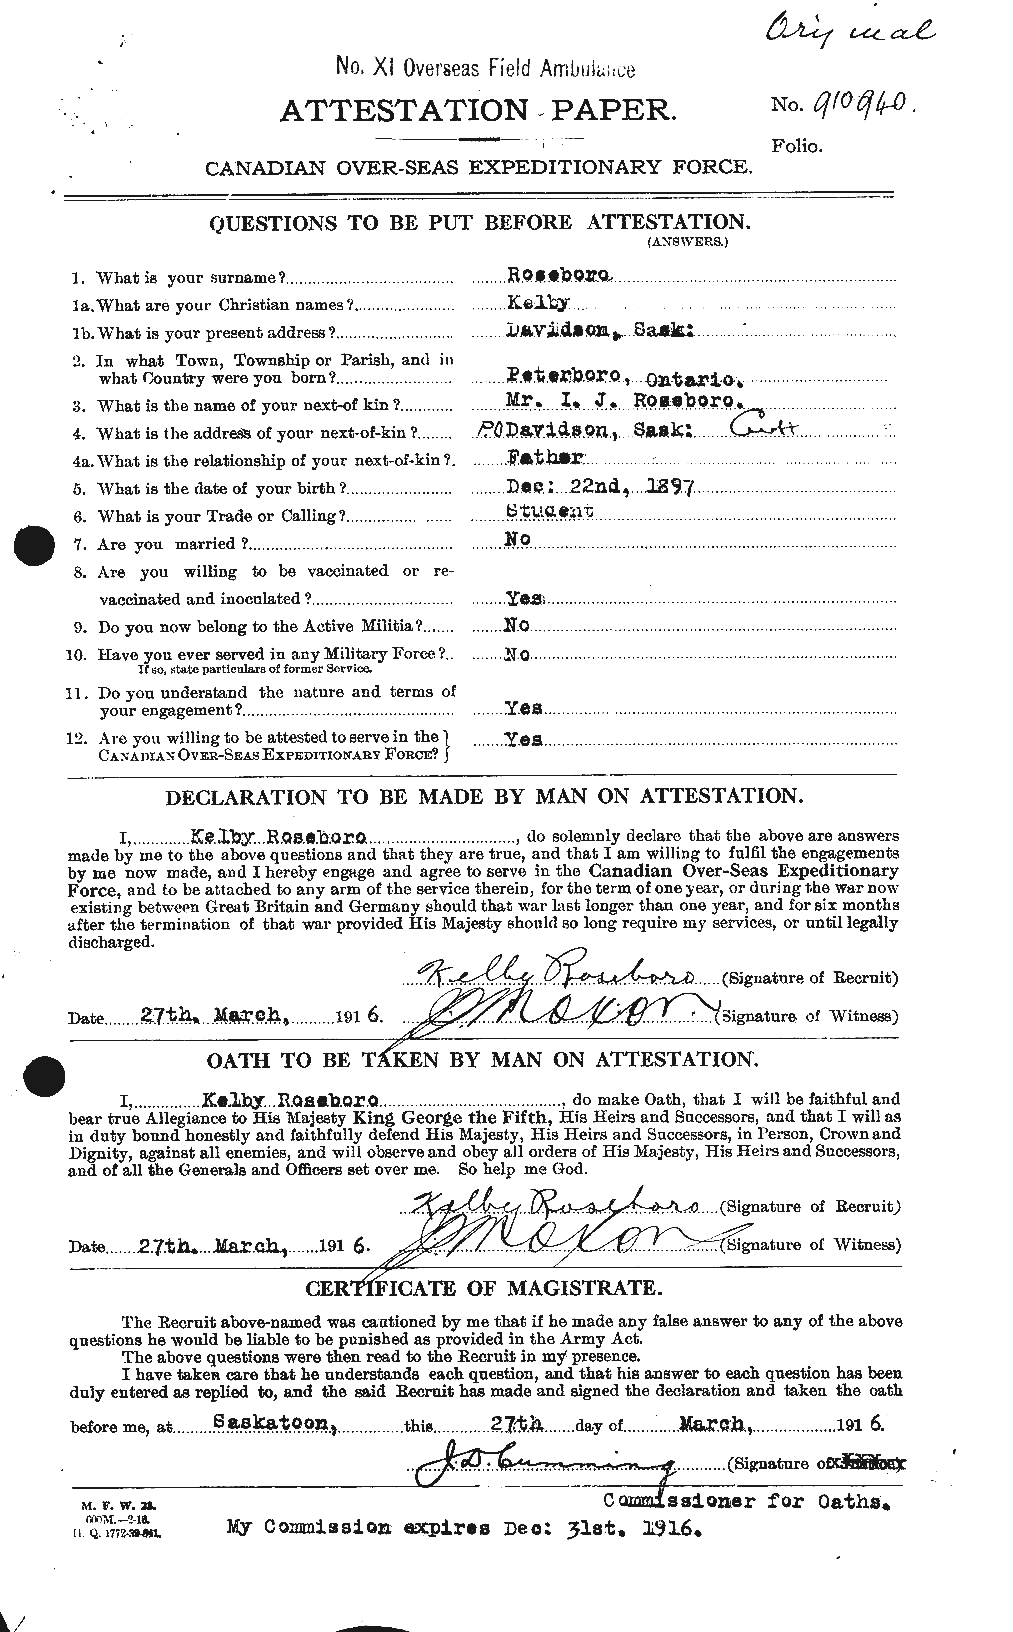 Personnel Records of the First World War - CEF 612606a